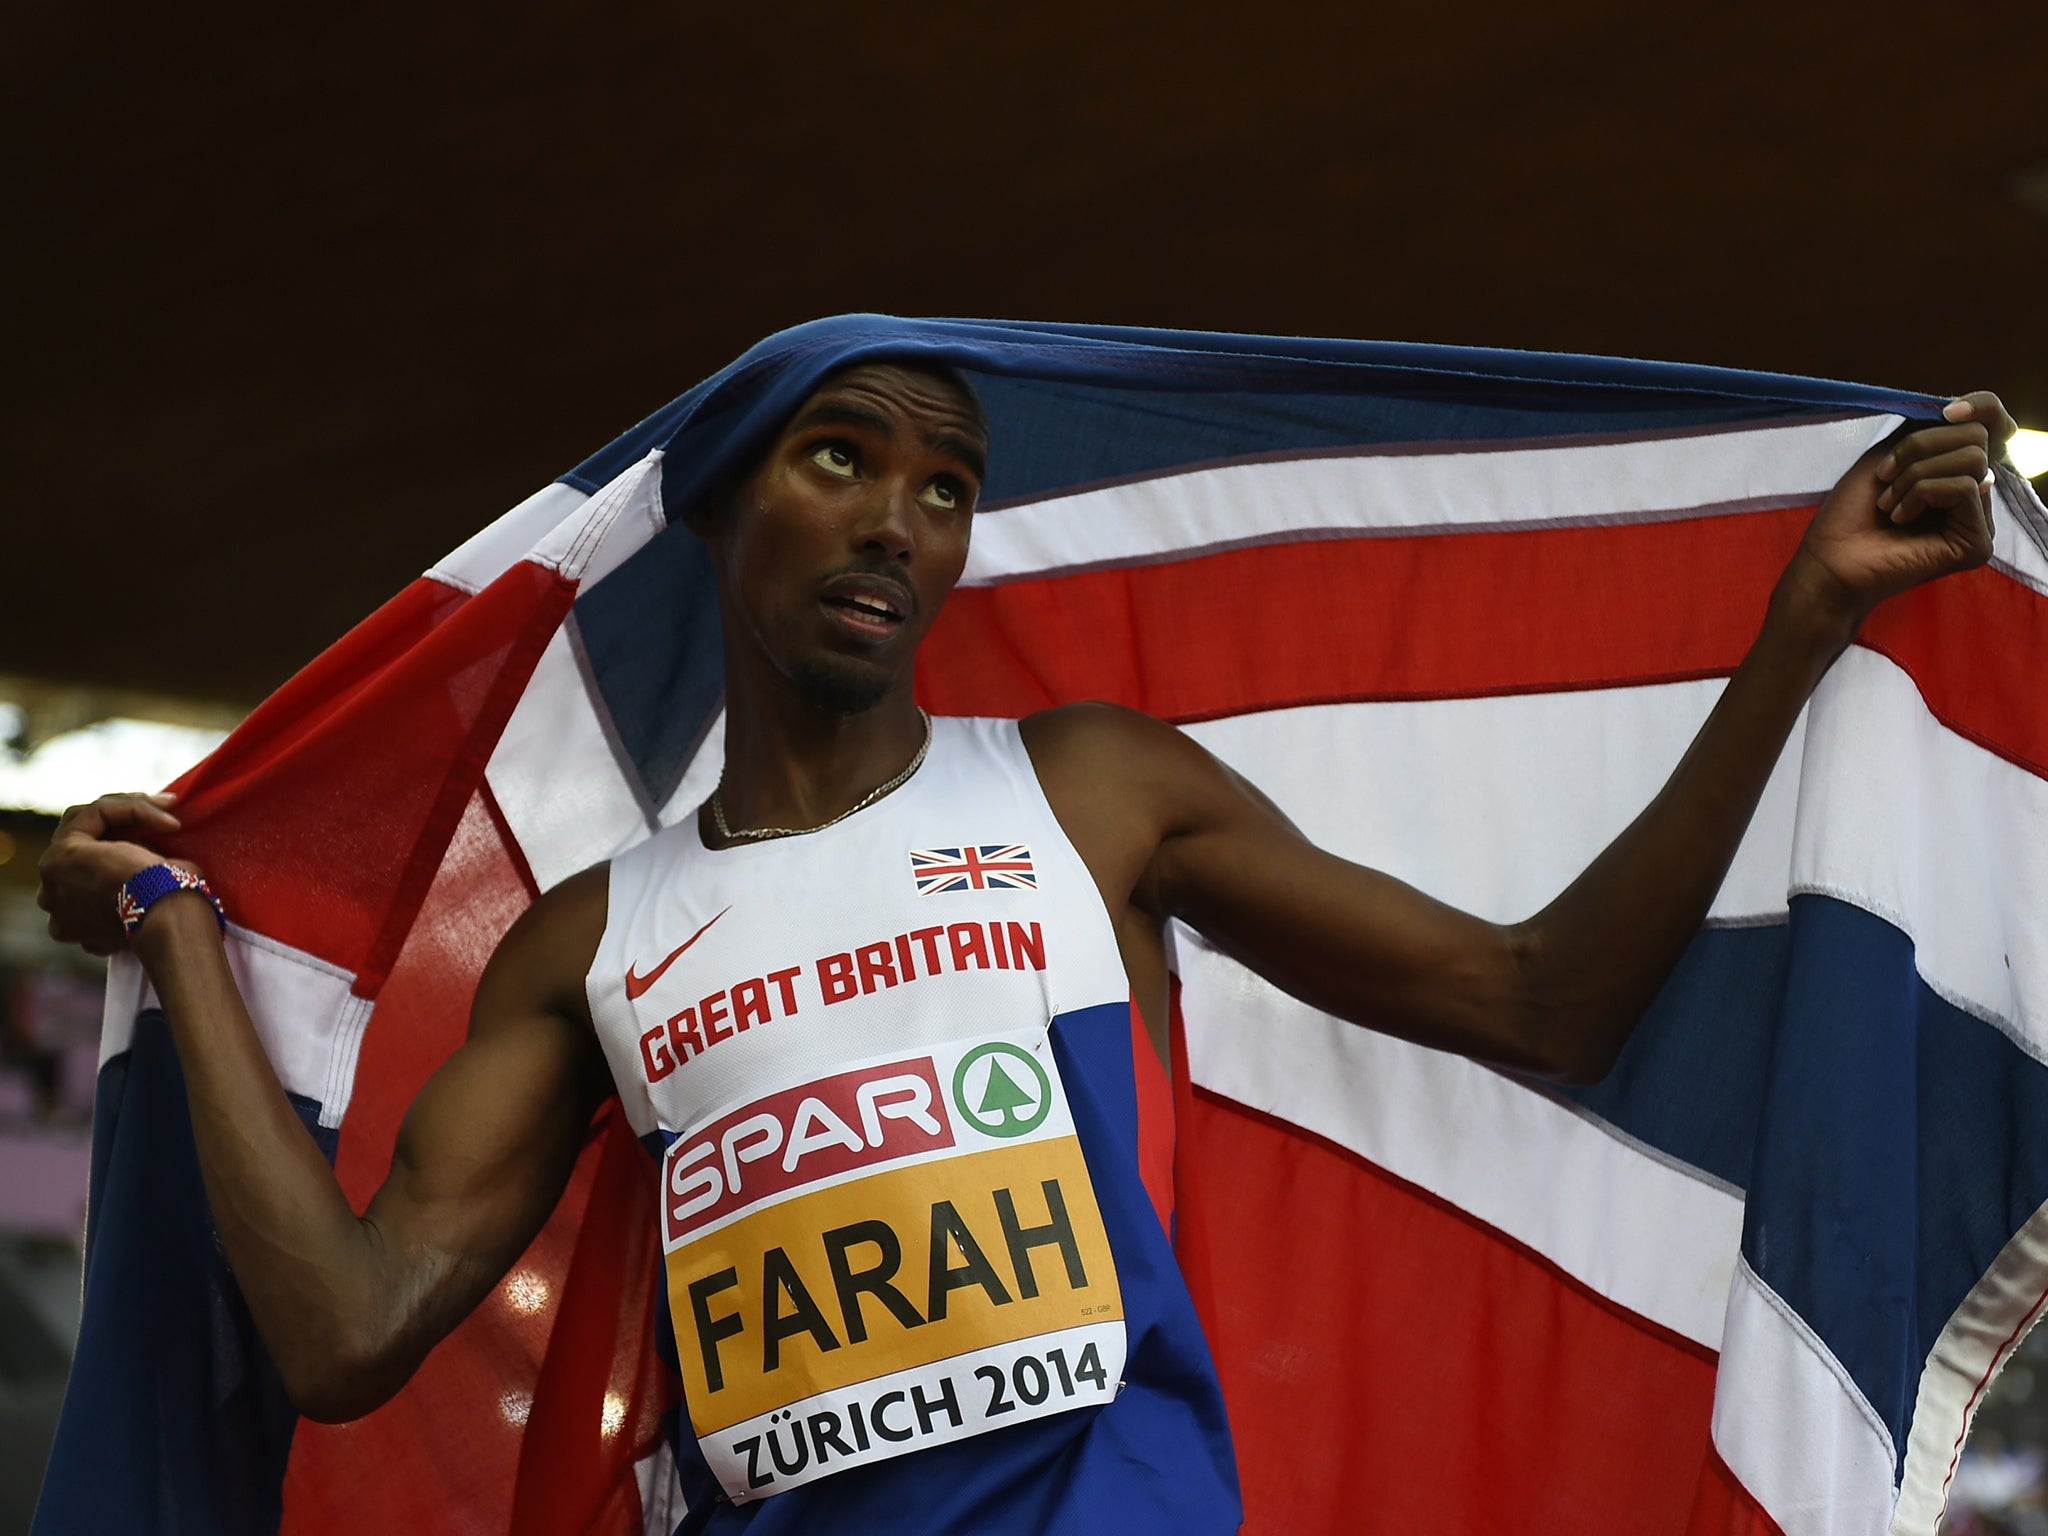 Mo Farah has claimed his Great Britain teammate Andy Vernon questioned his nationality